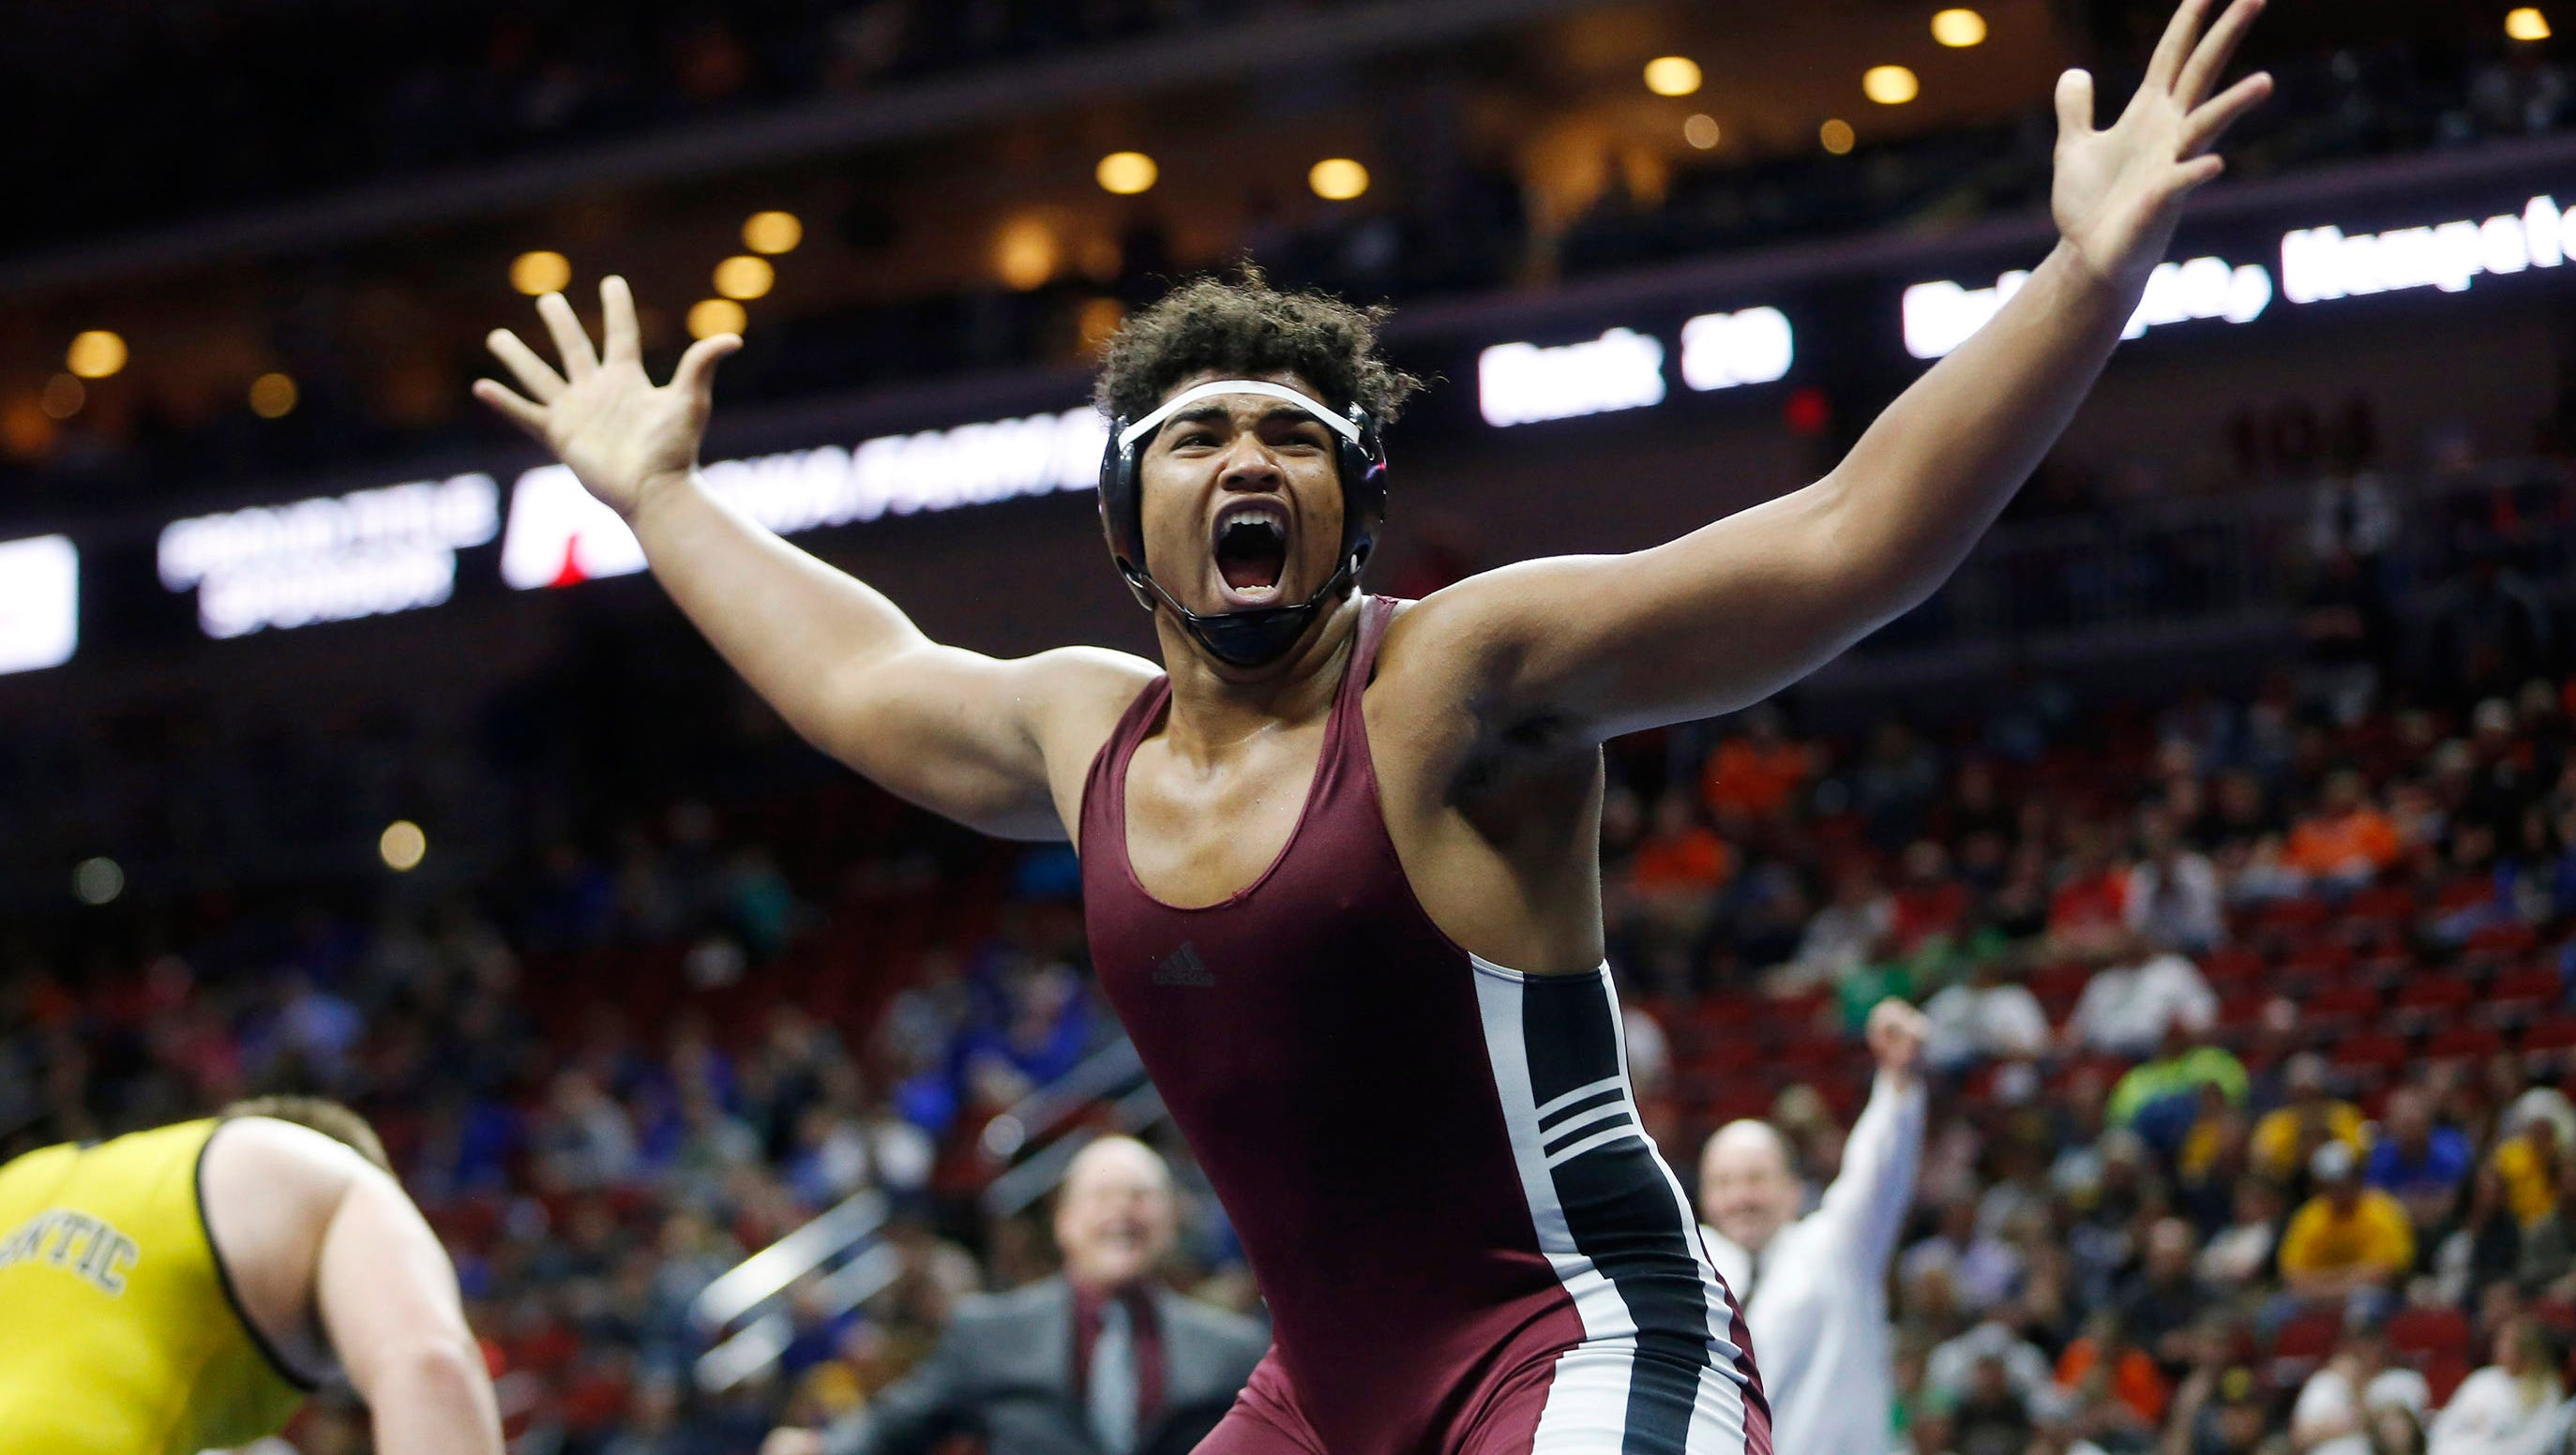 Mount Vernon's Tristan Wirfs celebrates his win in the class 2A, 220-pound title match Saturday, Feb. 18, 2017 in the state wrestling finals at Wells Fargo Arena in Des Moines.